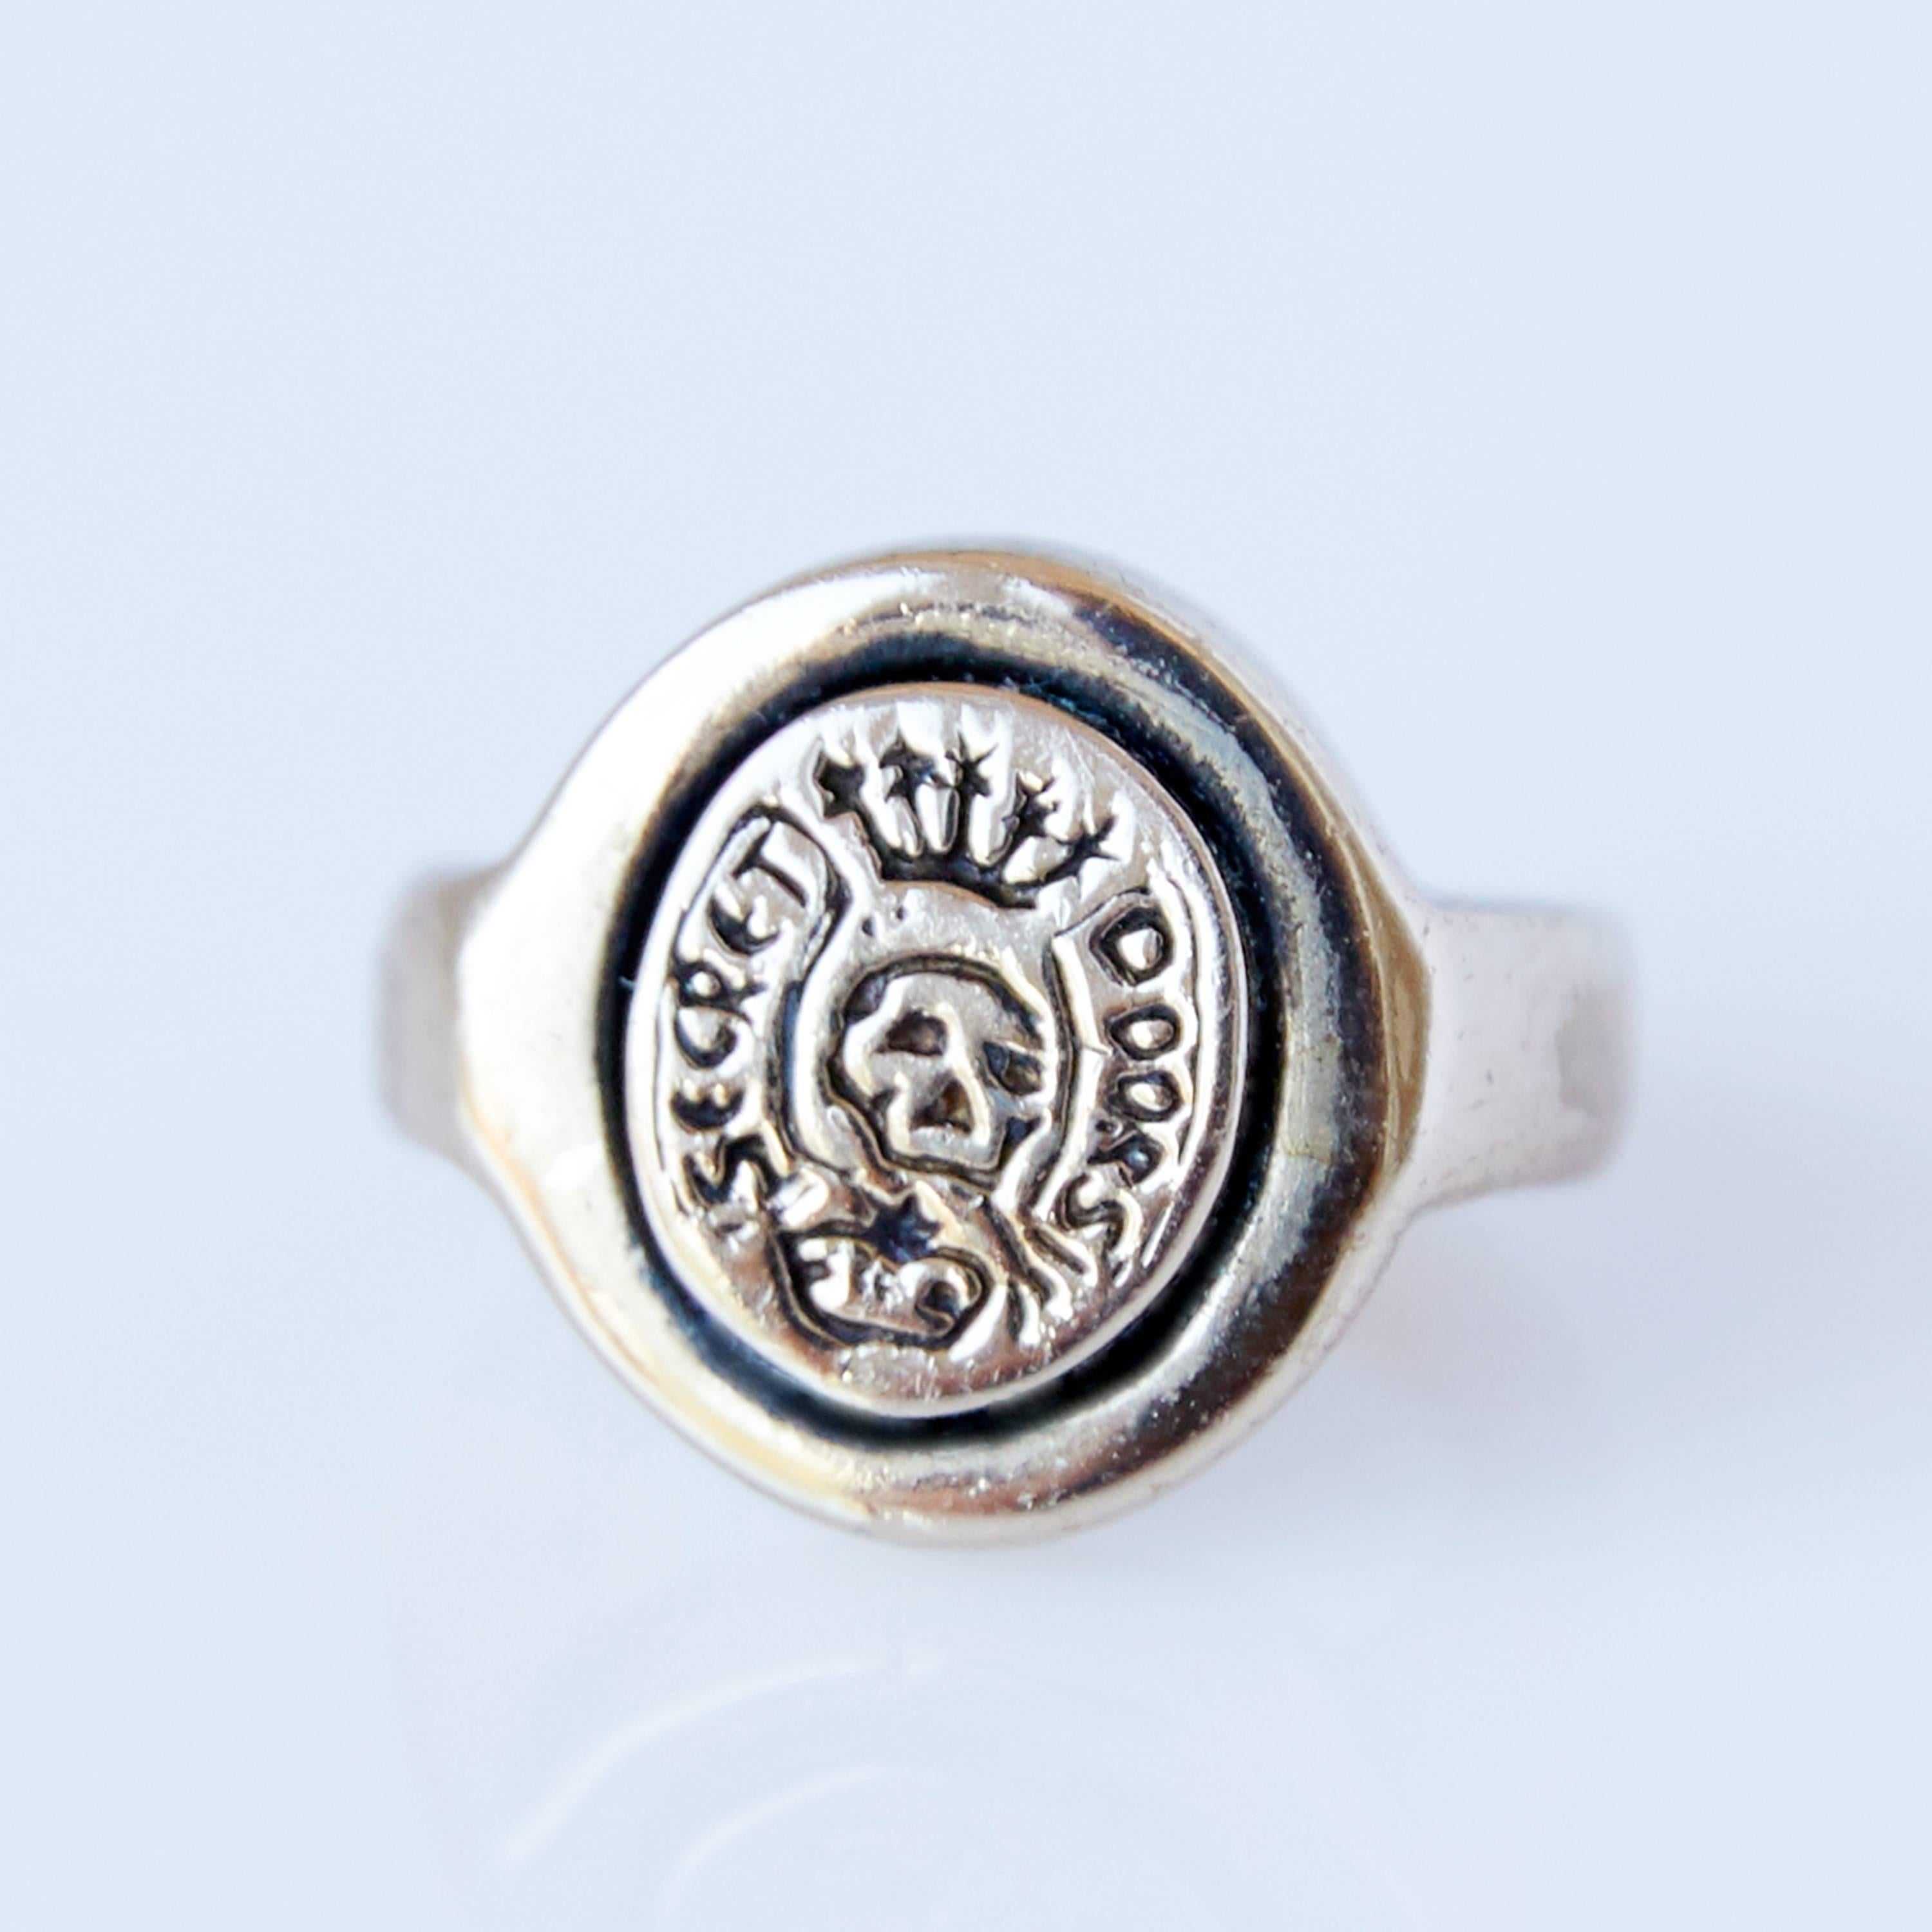 Crest Signet Skull Ring Silver Memento Mori Style Unisex J Dauphin In New Condition For Sale In Los Angeles, CA